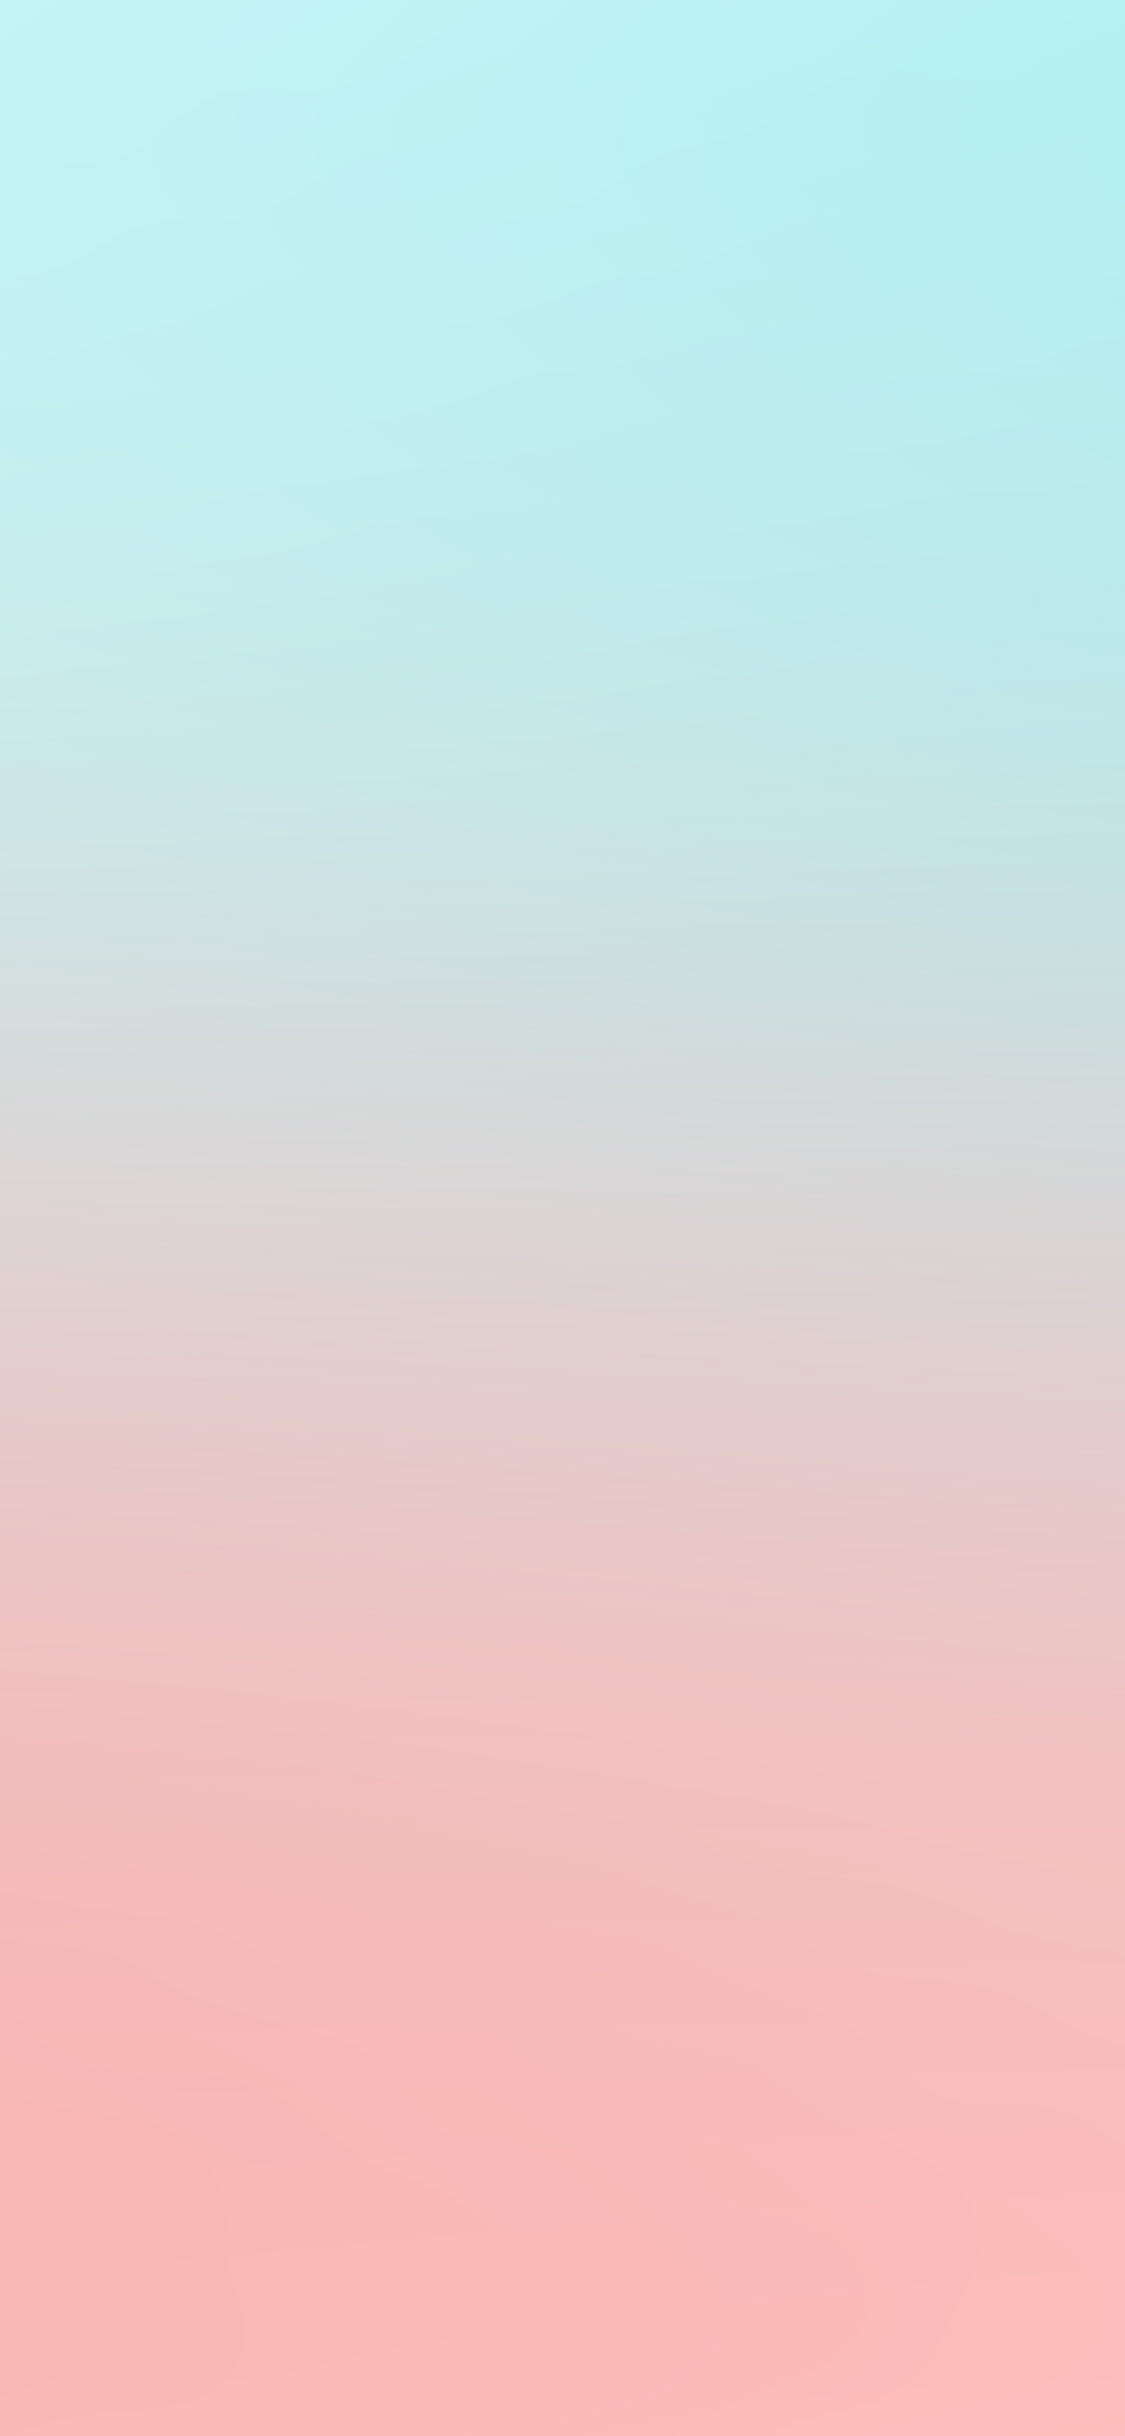 Pastel Red And Blue - 1125x2436 Wallpaper 